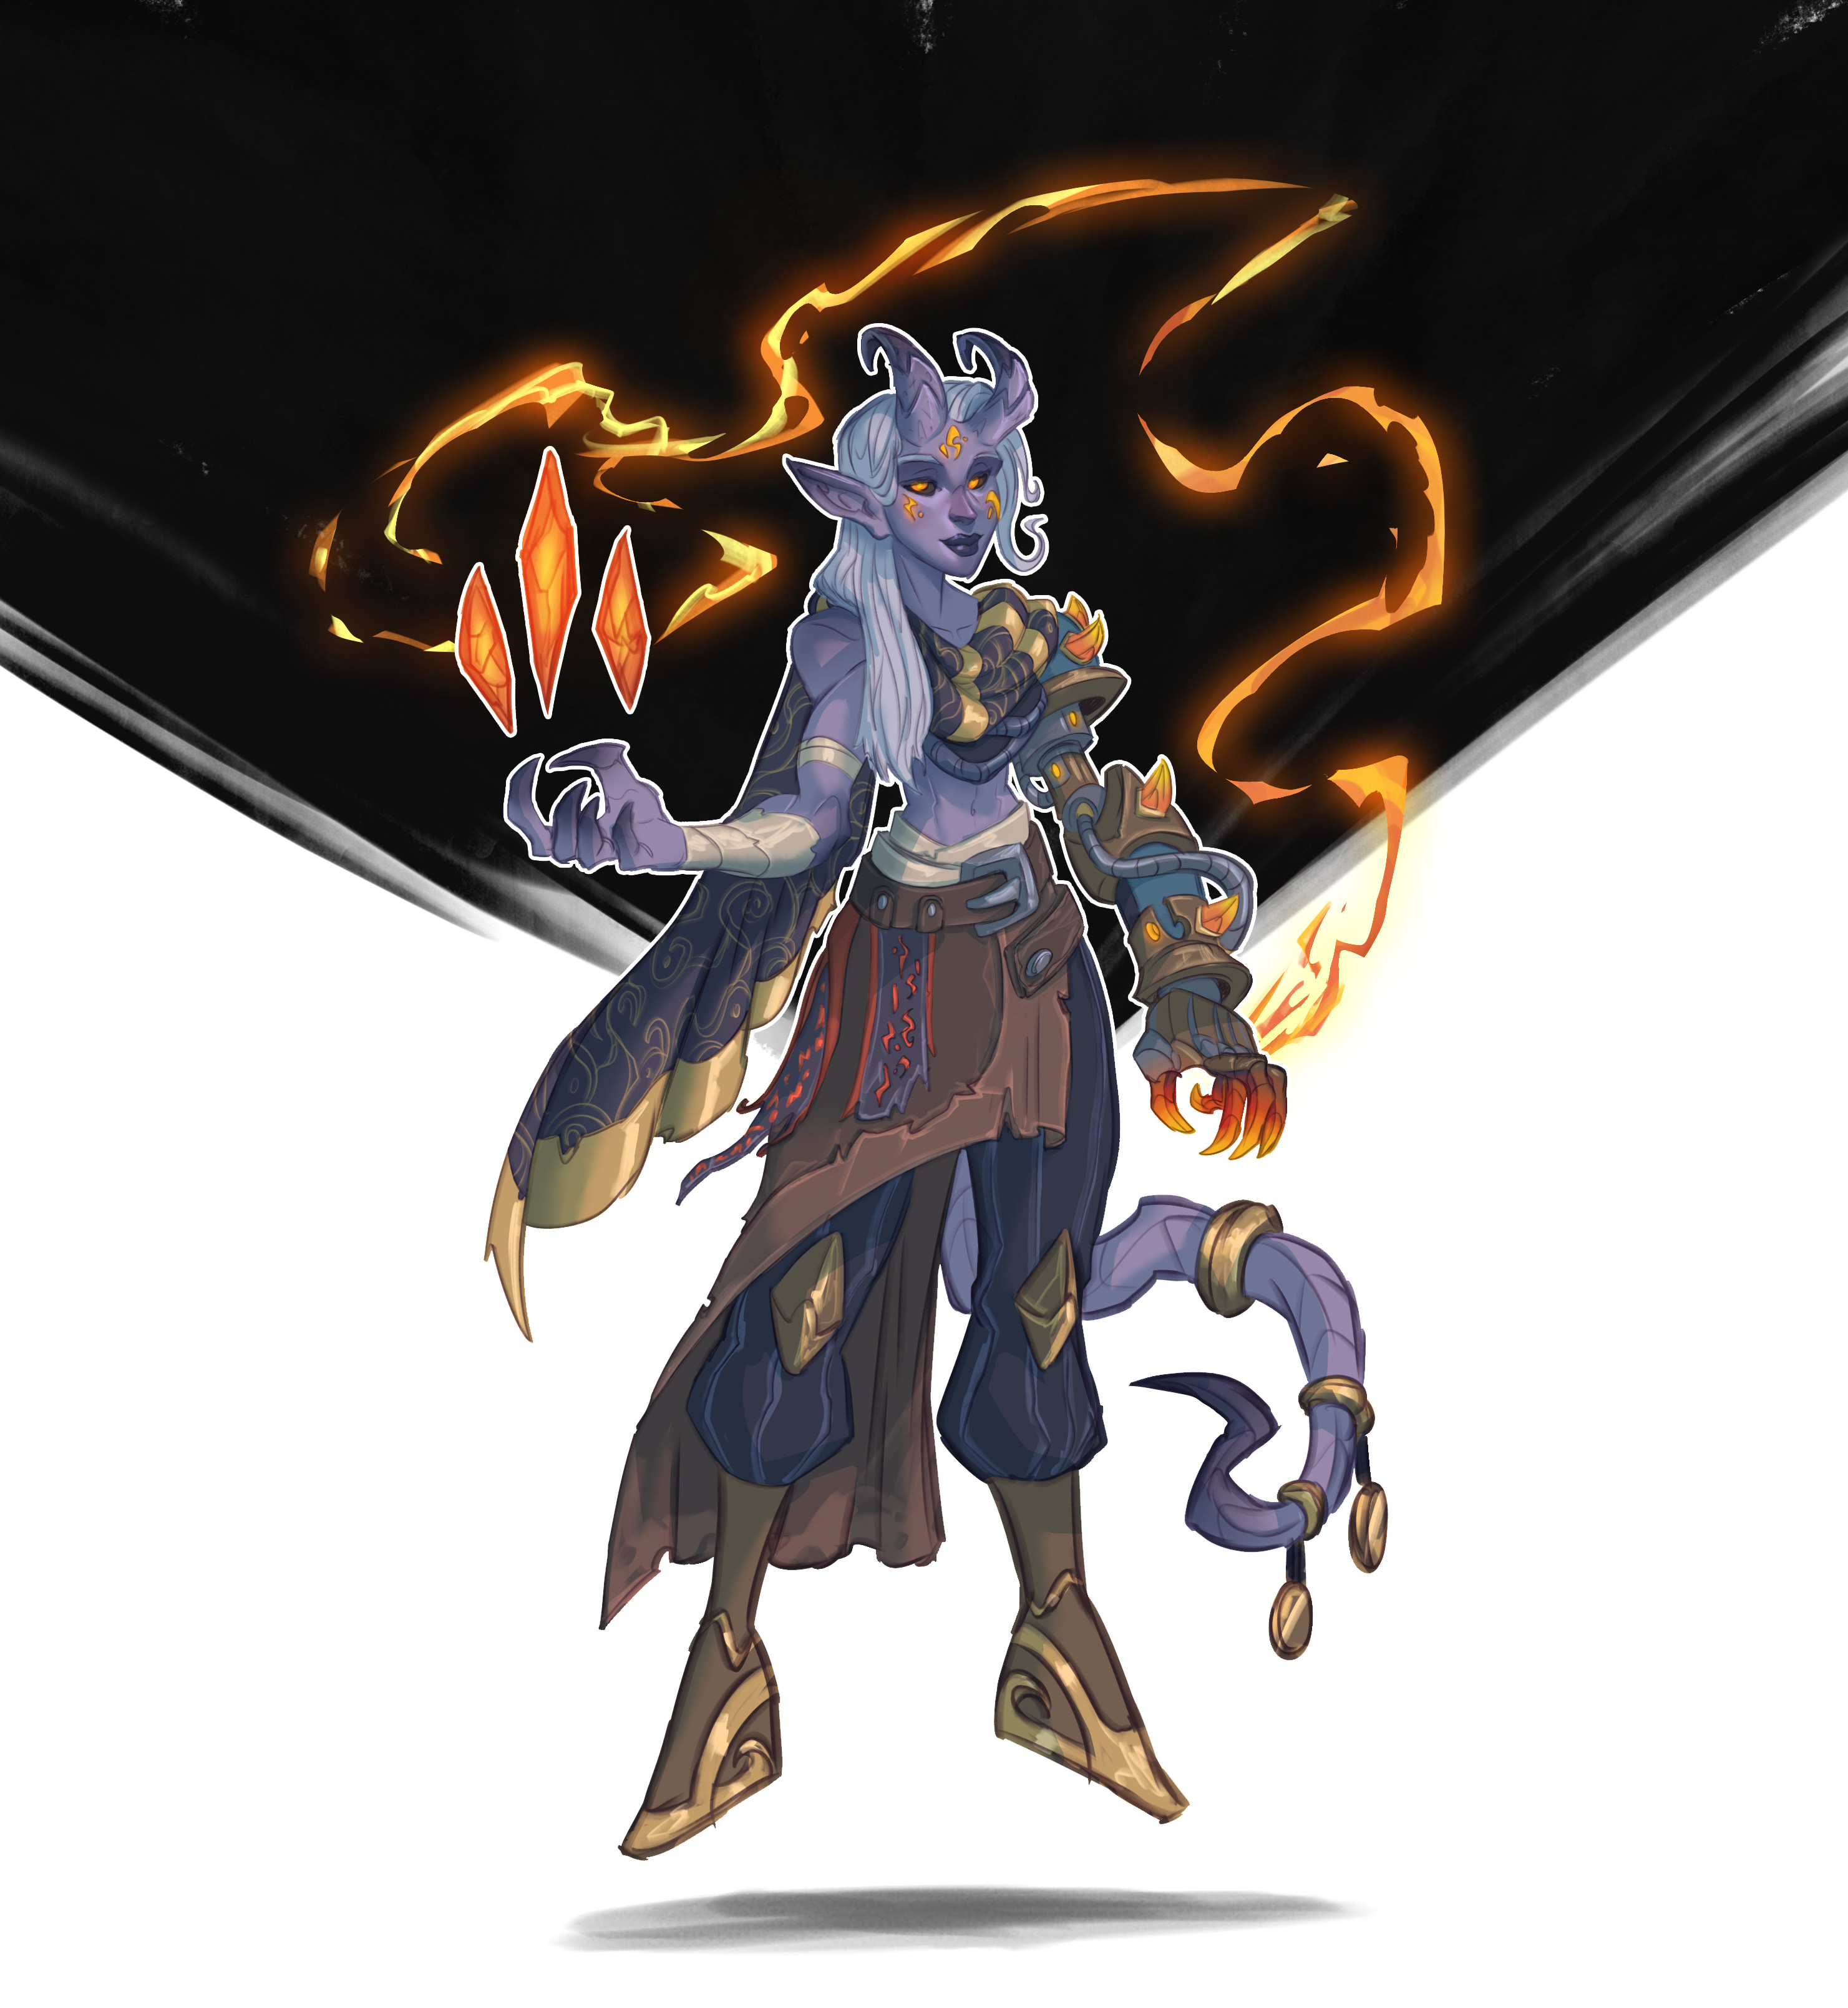 Soulfinder Almiurath, She will burn your soul.